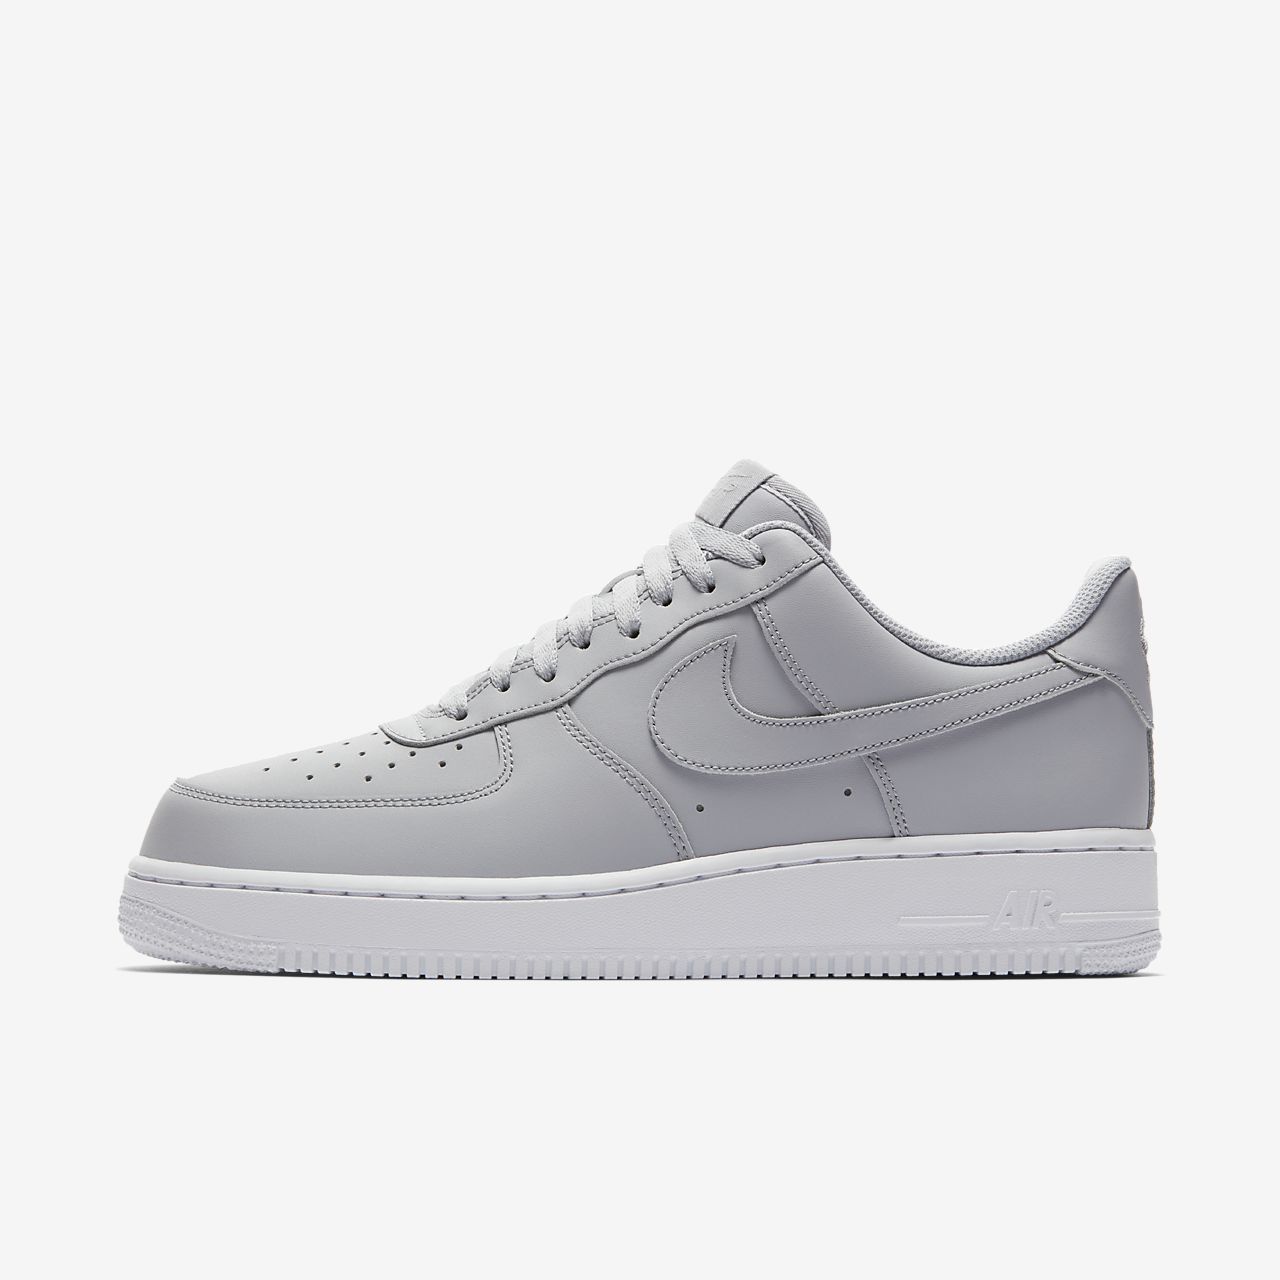 nike air force 1 grise et blanche